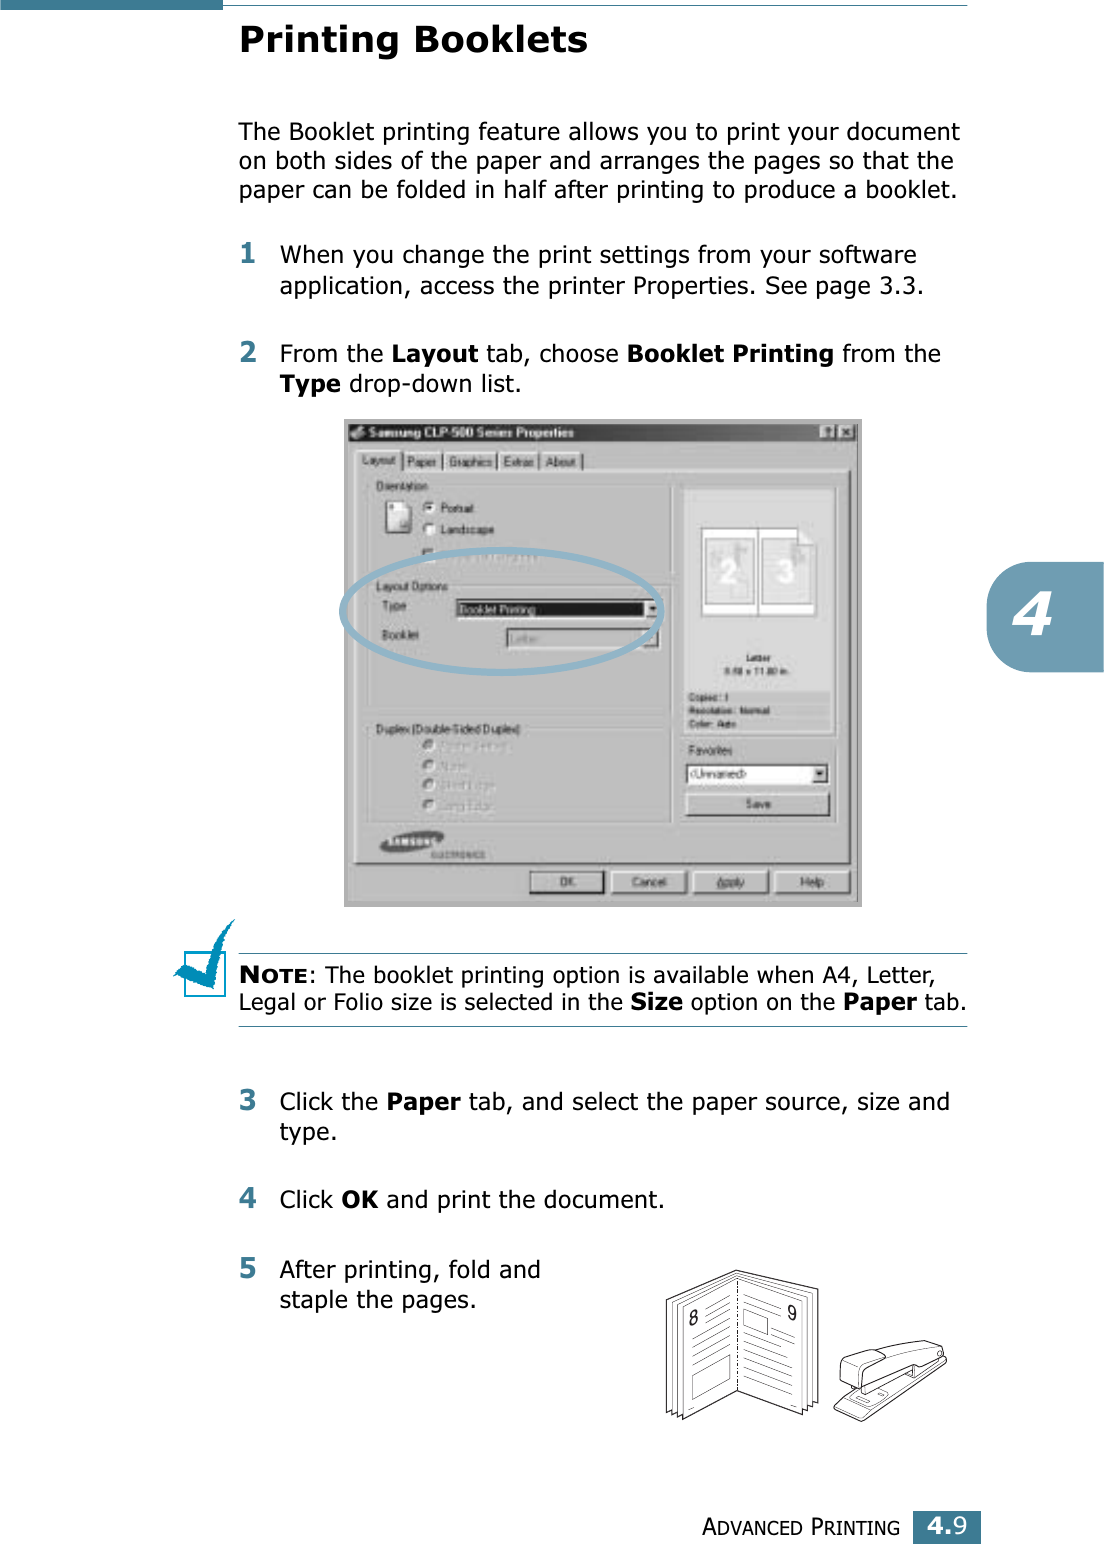 ADVANCED PRINTING4.94Printing BookletsThe Booklet printing feature allows you to print your document on both sides of the paper and arranges the pages so that the paper can be folded in half after printing to produce a booklet. 1When you change the print settings from your software application, access the printer Properties. See page 3.3.2From the Layout tab, choose Booklet Printing from the Type drop-down list. NOTE: The booklet printing option is available when A4, Letter, Legal or Folio size is selected in the Size option on the Paper tab.3Click the Paper tab, and select the paper source, size and type.4Click OK and print the document.5After printing, fold and staple the pages. 89